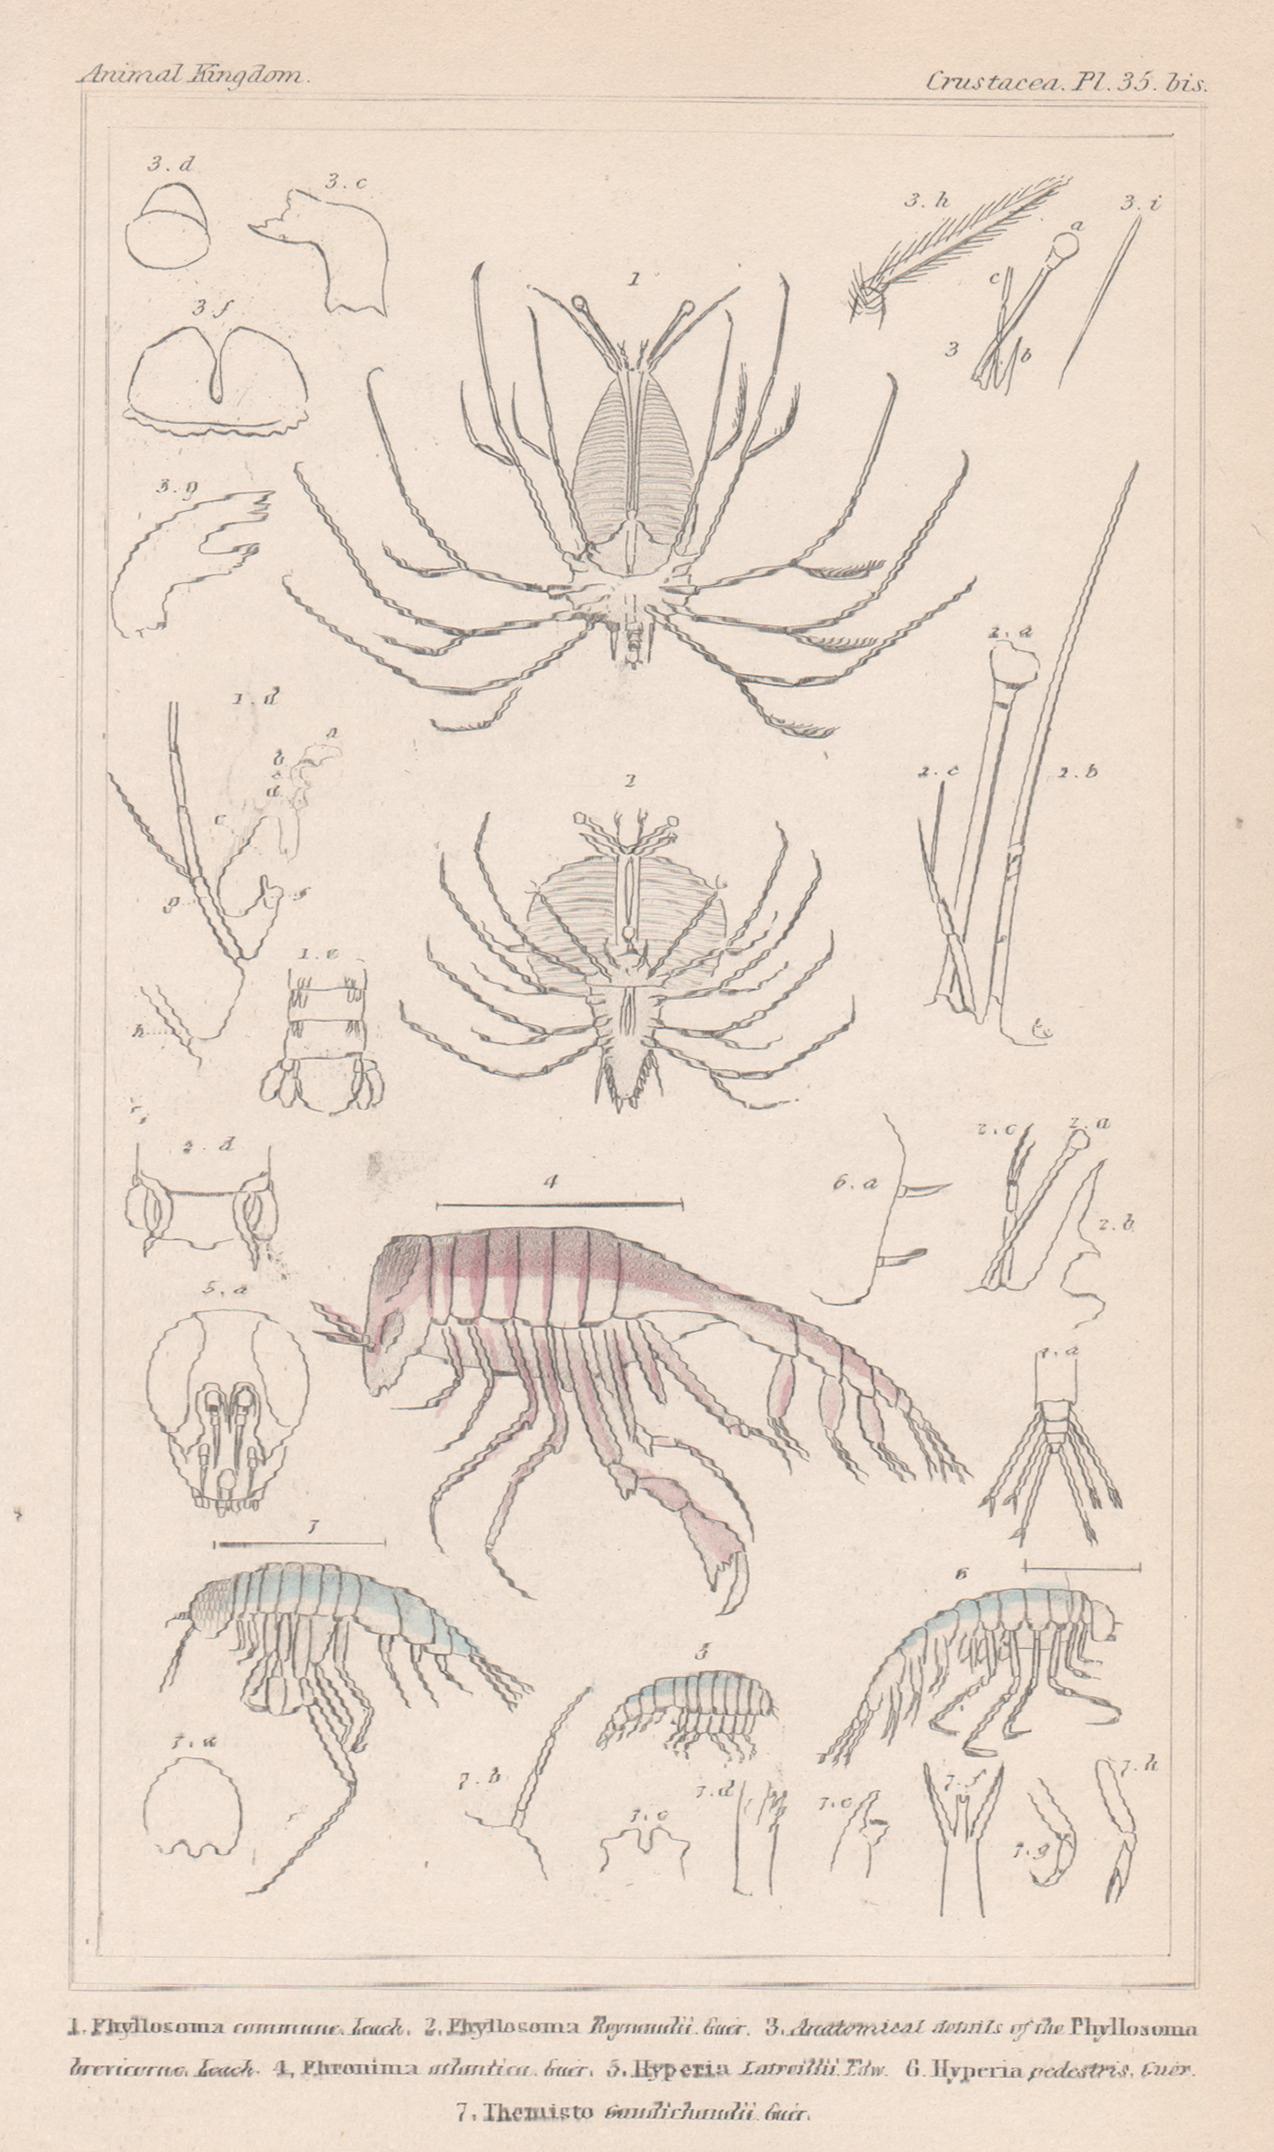 Unknown Animal Print - Crustaceans - shrimps, antique English natural history engraving print, 1837